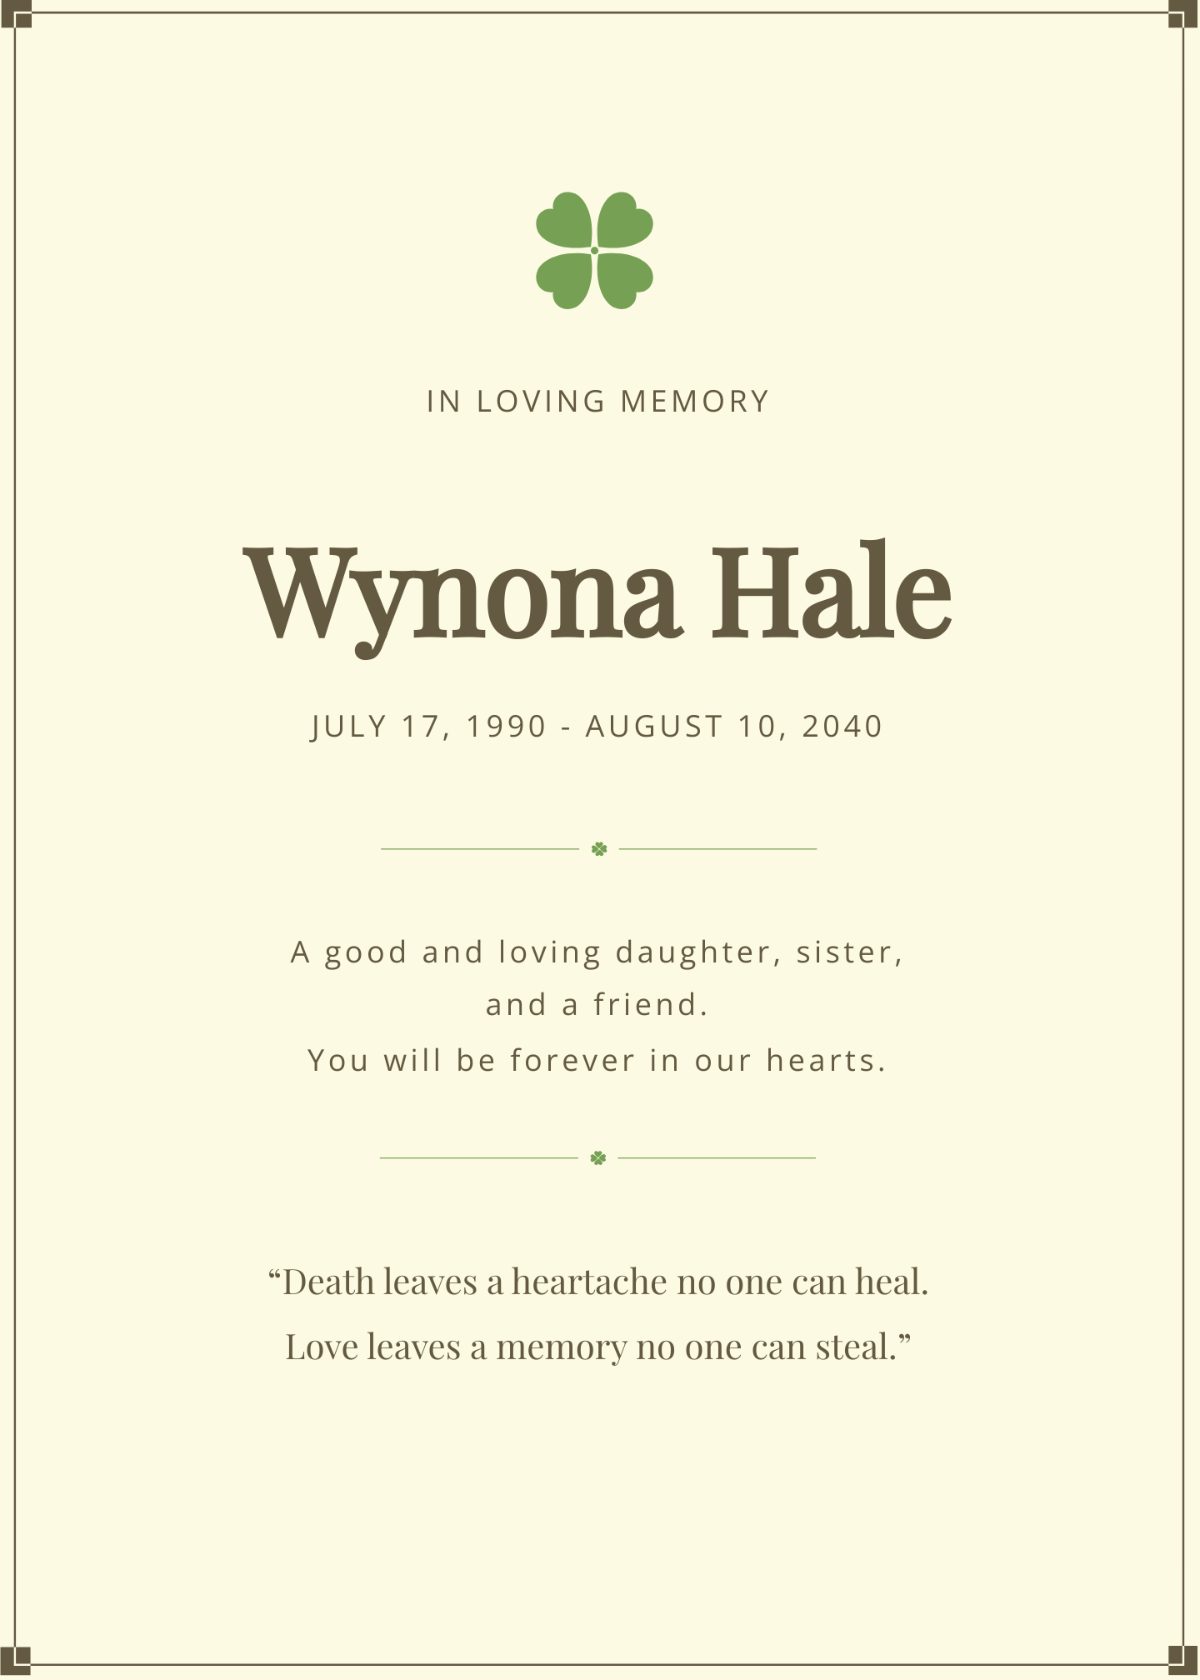 Irish Funeral Remembrance Card Template